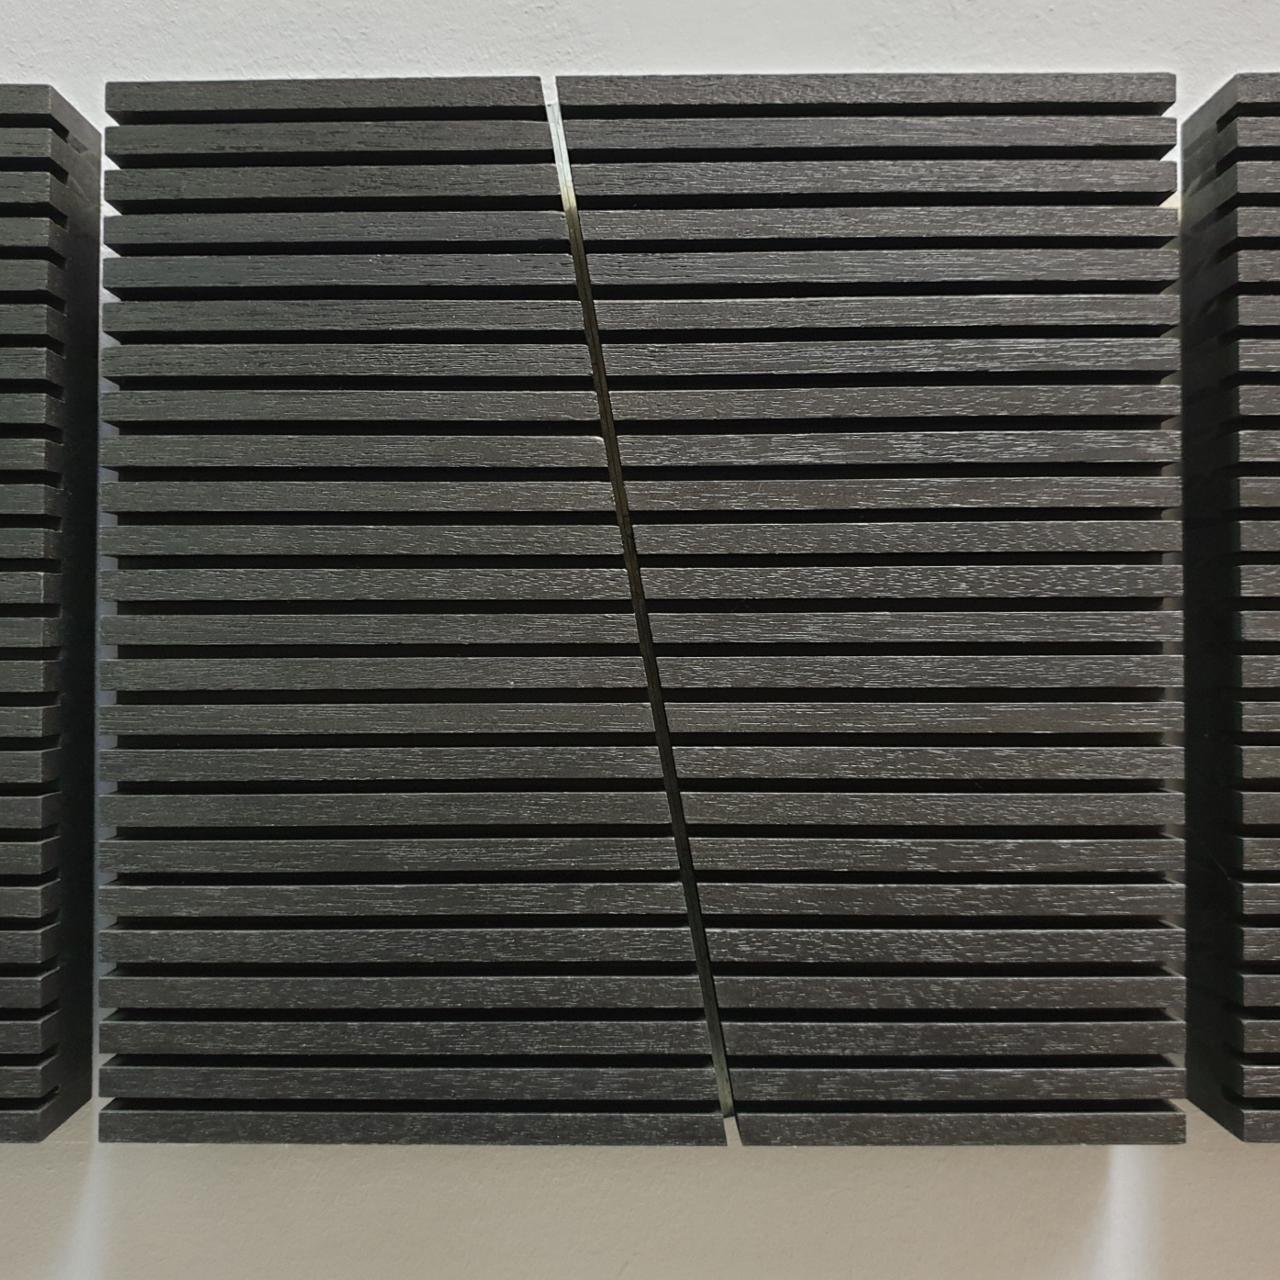 Construction lineaire is a medium size contemporary modern sculpture painting relief by French-Dutch artist Olivier Julia. The triptych is made from wood with one glass element in the middle section and it is finished with a mixture of anthracite